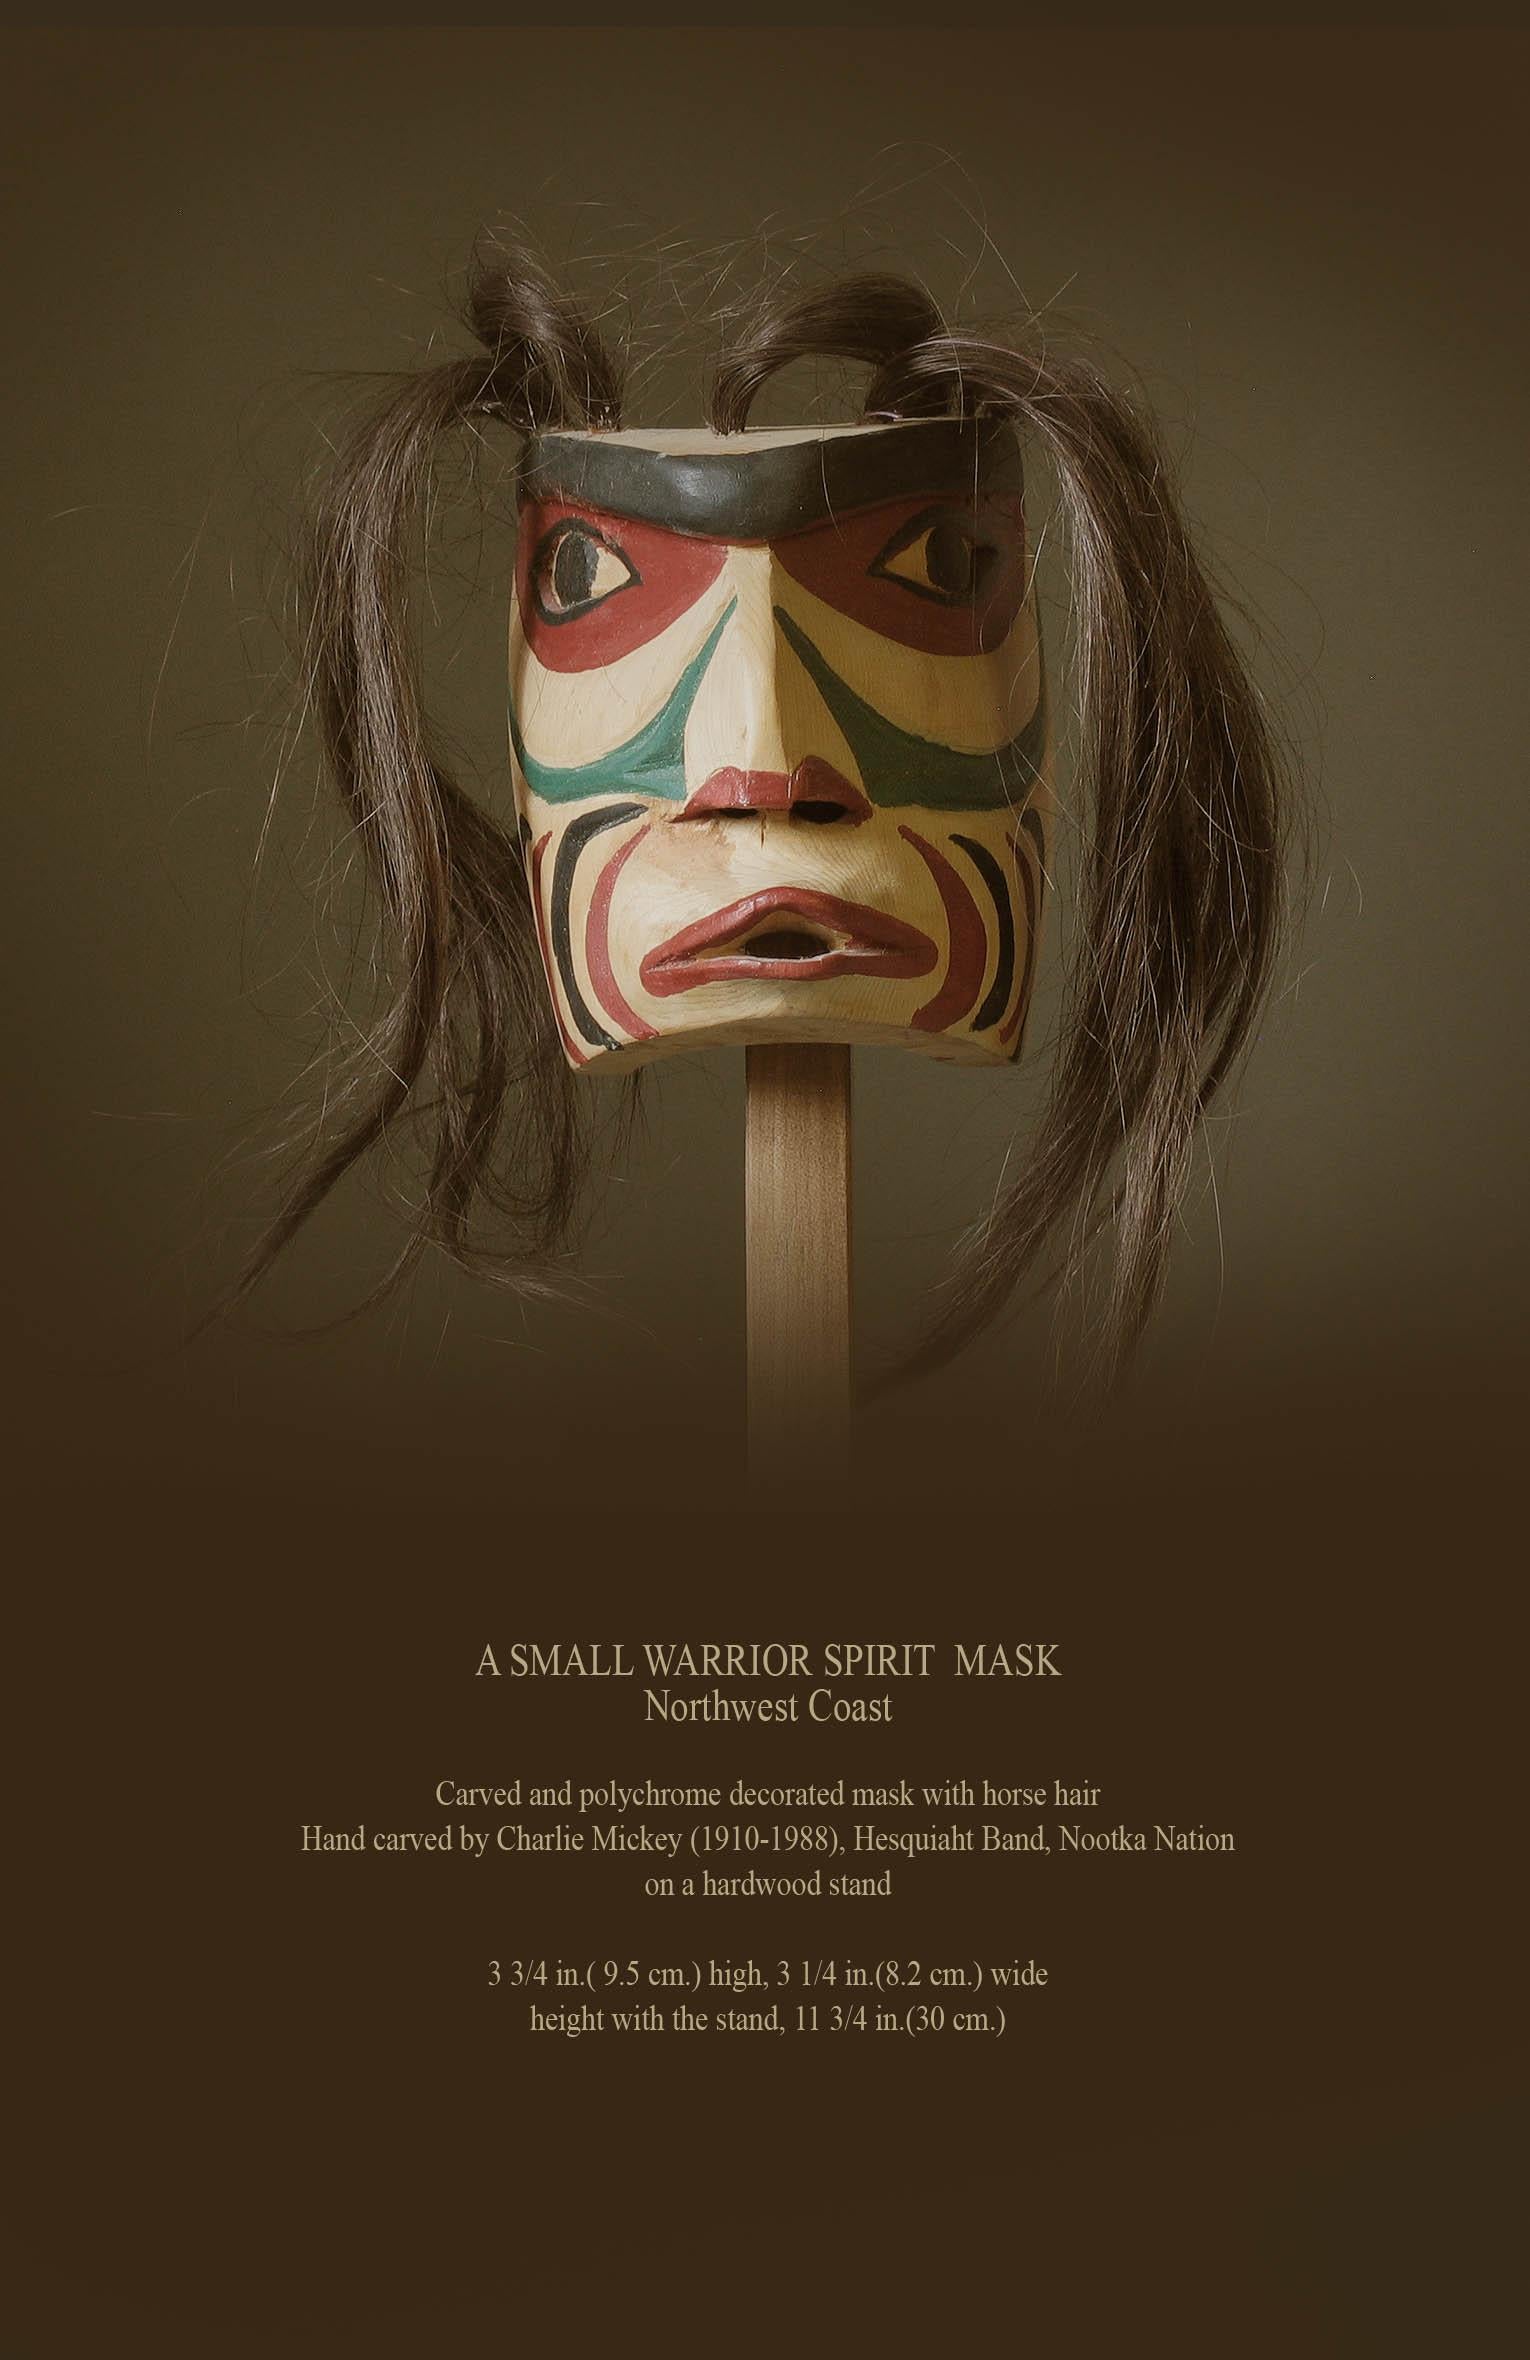 A small warrior spirit mask
Northwest Coast

Carved and polychrome decorated mask with horse hair,
Hand carved by Charlie Mickey (1910-1988), Hesquiaht Band, Nootka Nation.
Mounted on a hardwood stand.

Measures 3 3/4 in.( 9.5 cm.) high, 3